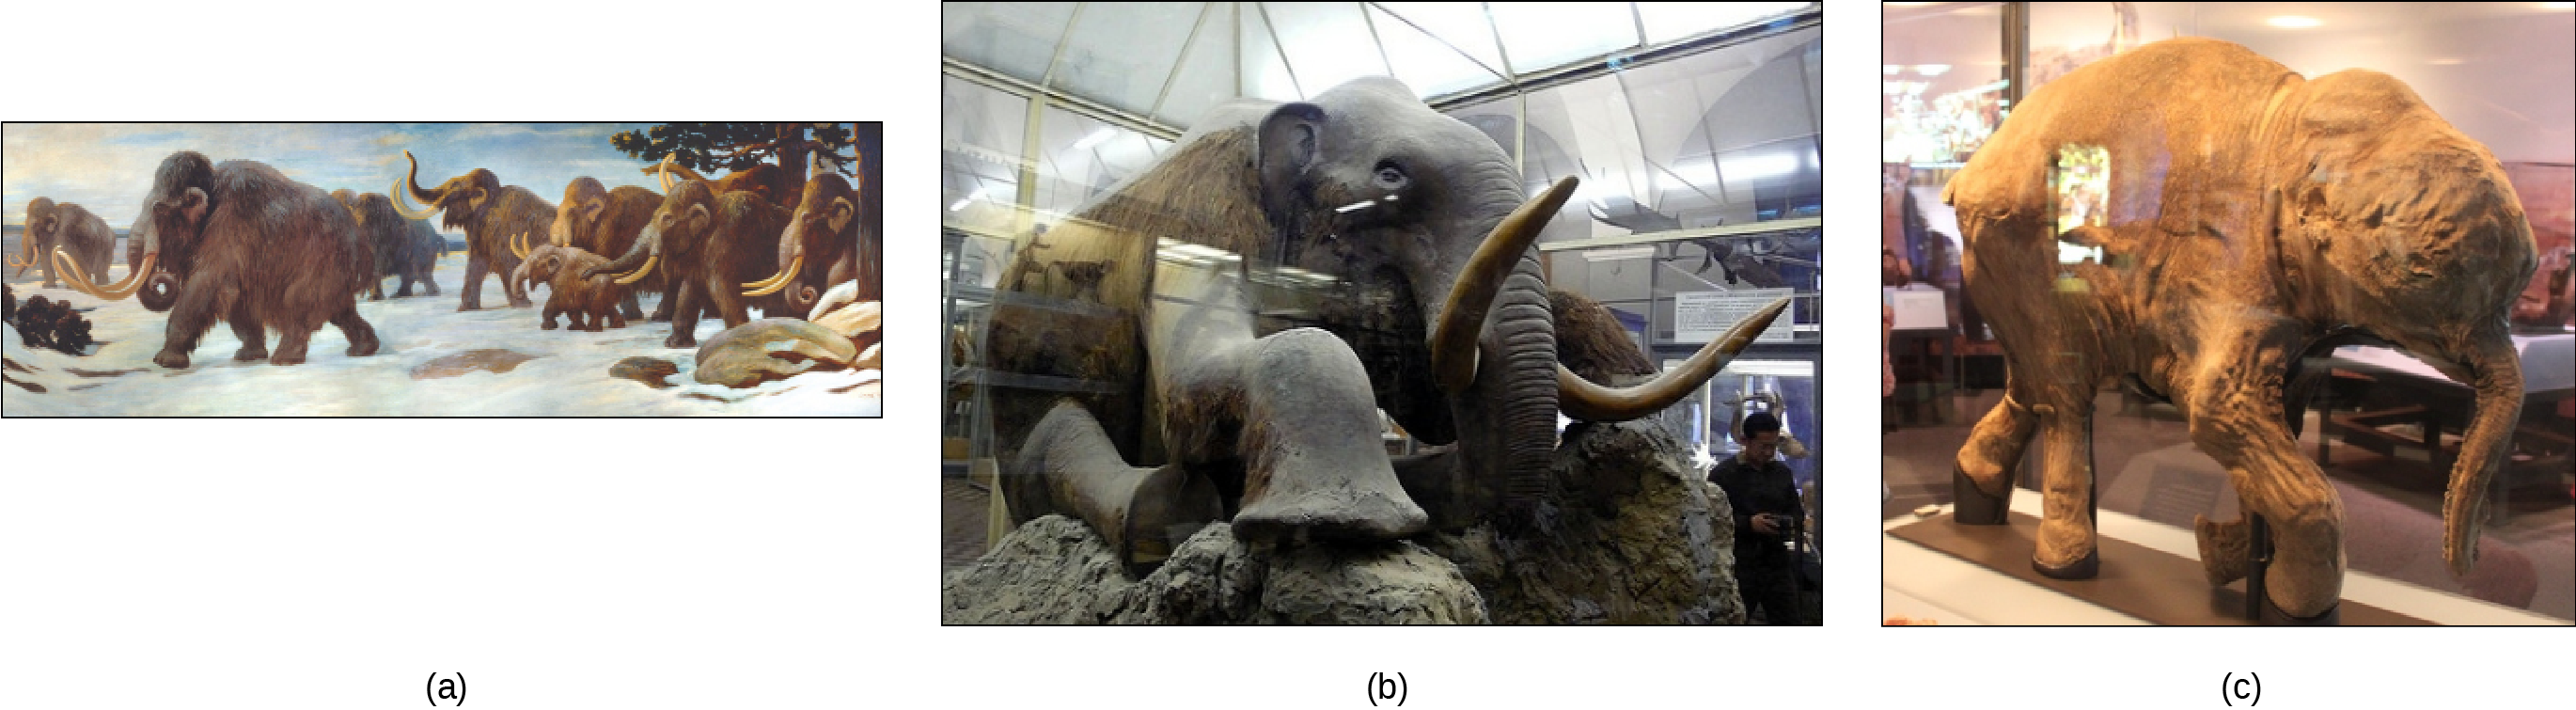 Three depictions of mammoths are shown.  They are large, elephant like creatures covered in fur and have long tusks. Photo a shows a painting of mammoths walking in the snow. Photo b shows a stuffed mammoth sitting in a museum display case. Photo c shows a mummified baby mammoth, also in a display case. Photo (b) shows a stuffed mammoth sitting in a museum display case. Photo (c) shows a mummified baby mammoth, also in a display case.